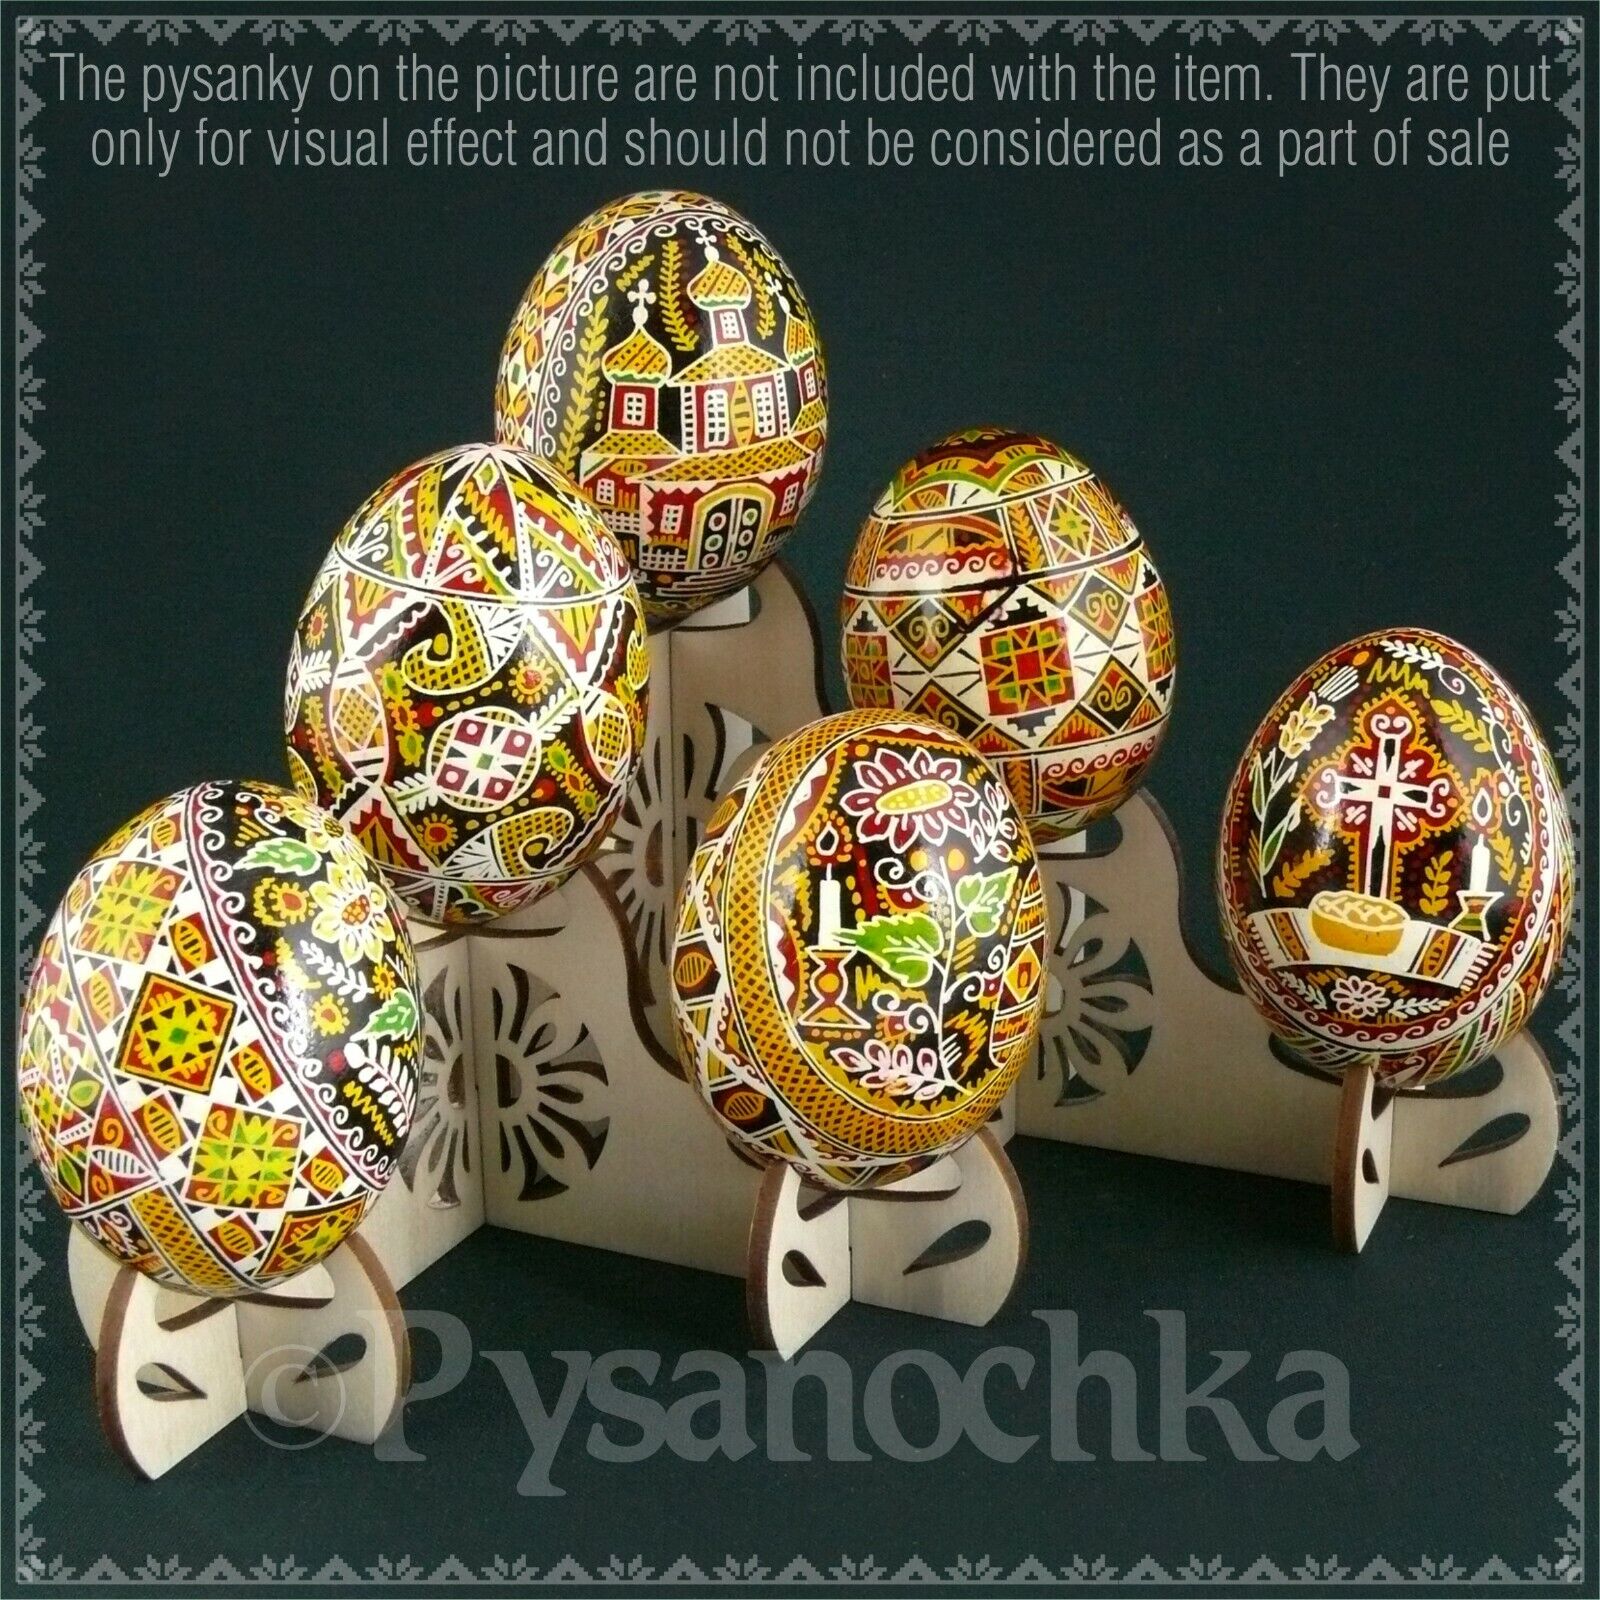 Real plywood pysanka Stand Holder Display for 6 Chicken or Goose Easter Egg. 